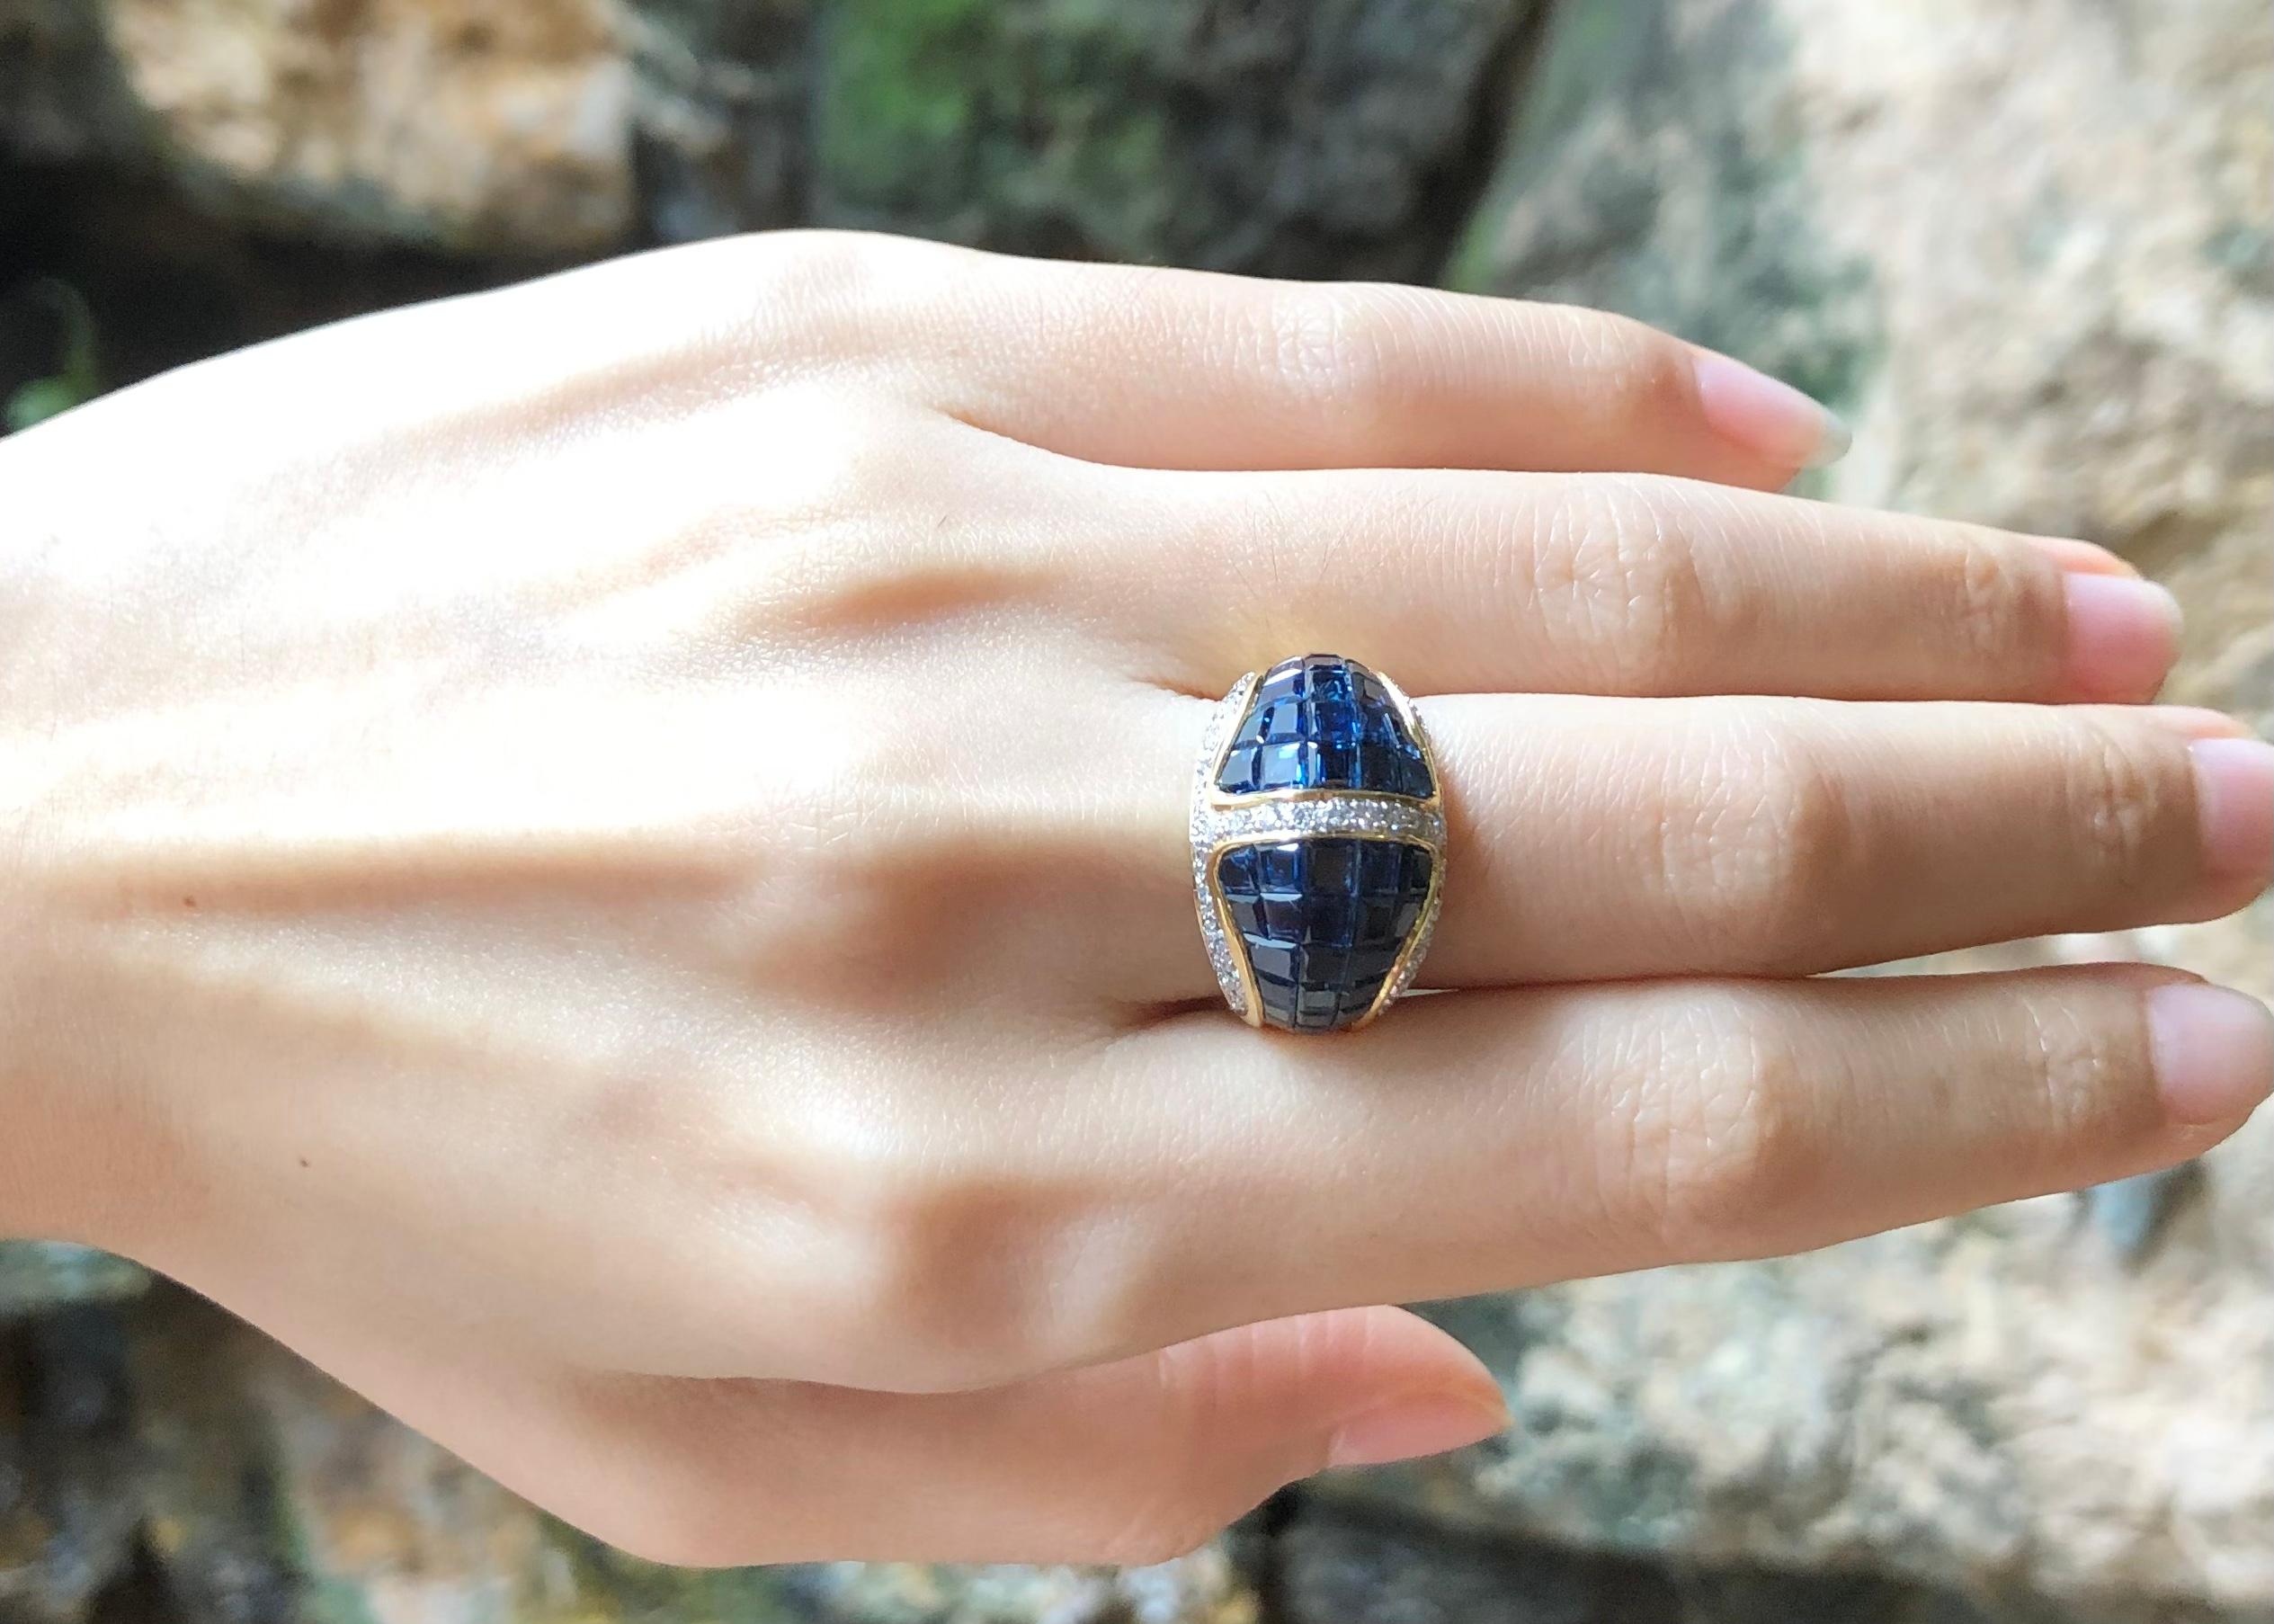 Blue Sapphire 10.54 carats with Diamond 0.57 carat Ring set in 18 Karat Gold Settings

Width:  2.0 cm 
Length: 1.4 cm
Ring Size: 52
Total Weight: 10.54 grams


